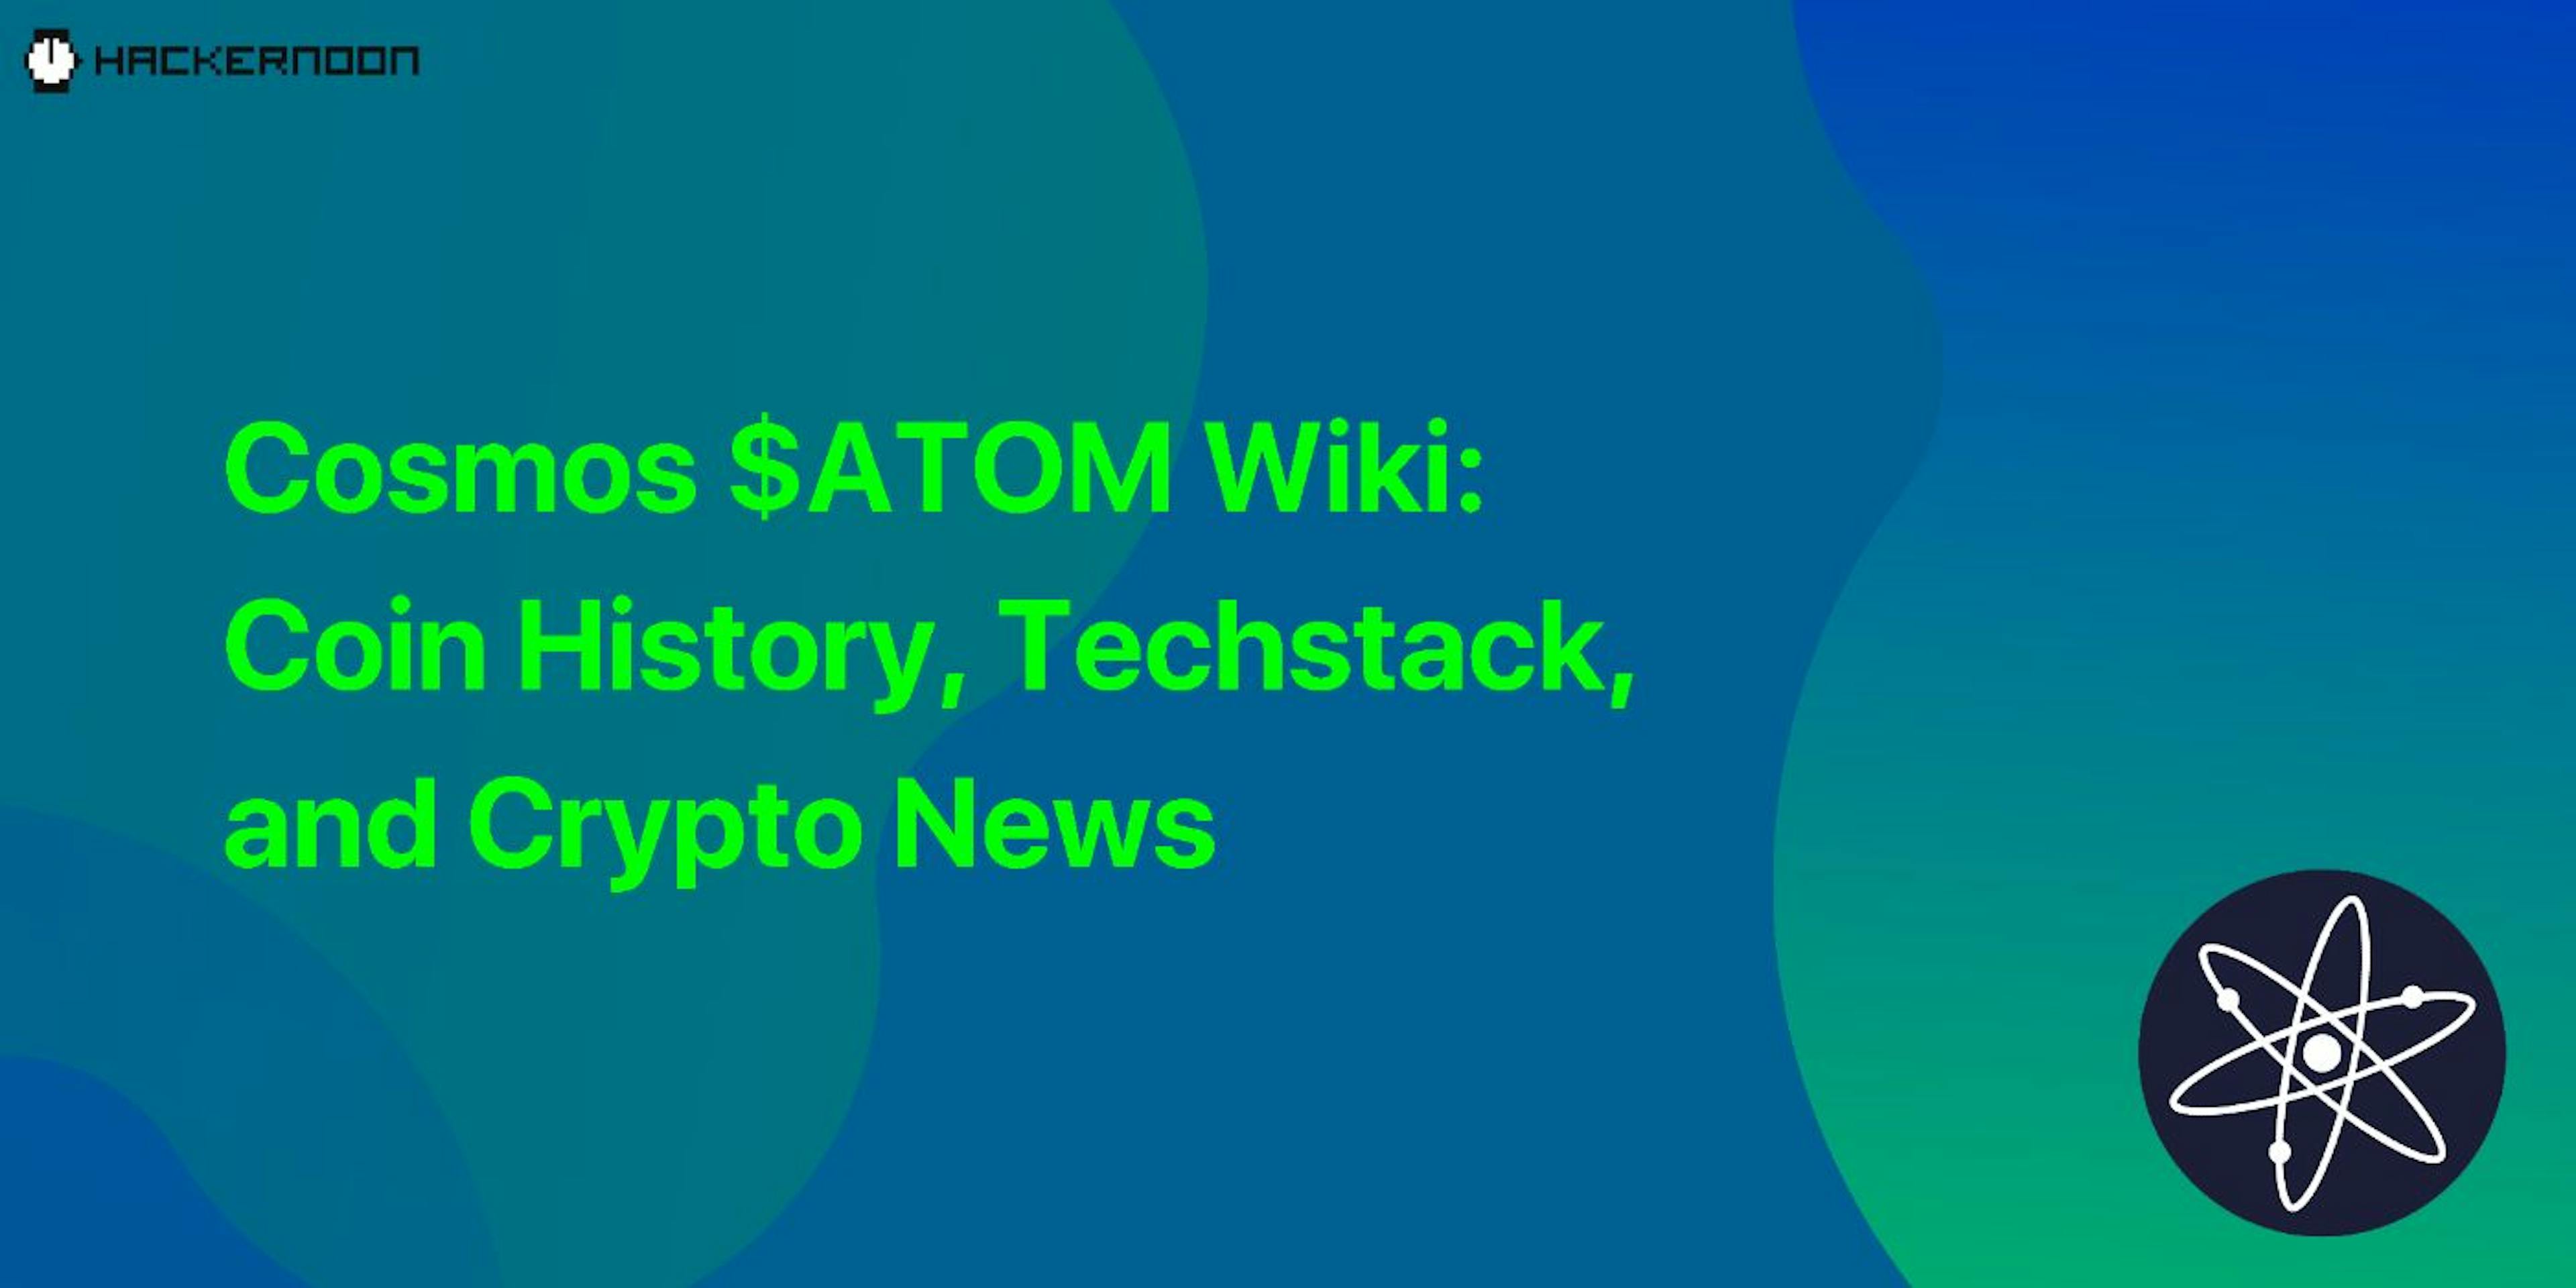 featured image - Cosmos $ATOM Wiki: Coin History, Techstack, and Crypto News